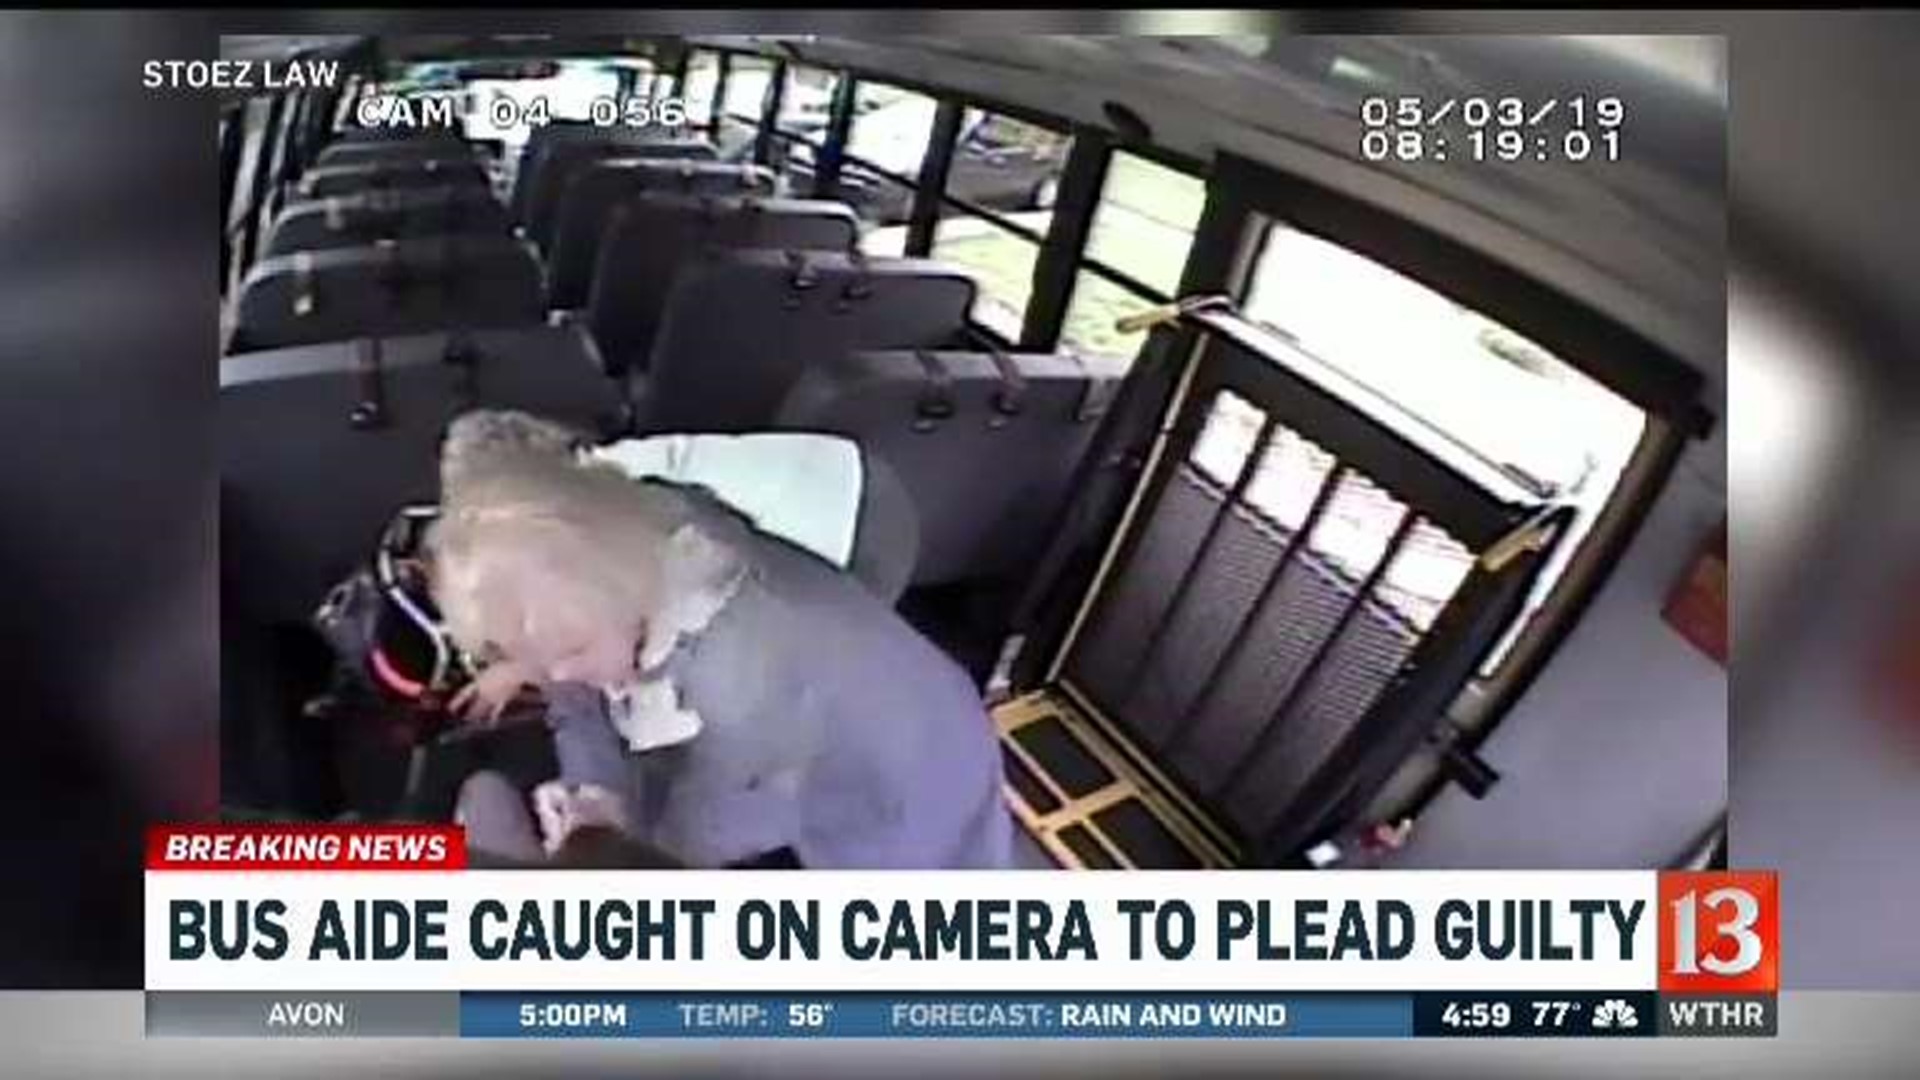 Bus aide to plead guilty